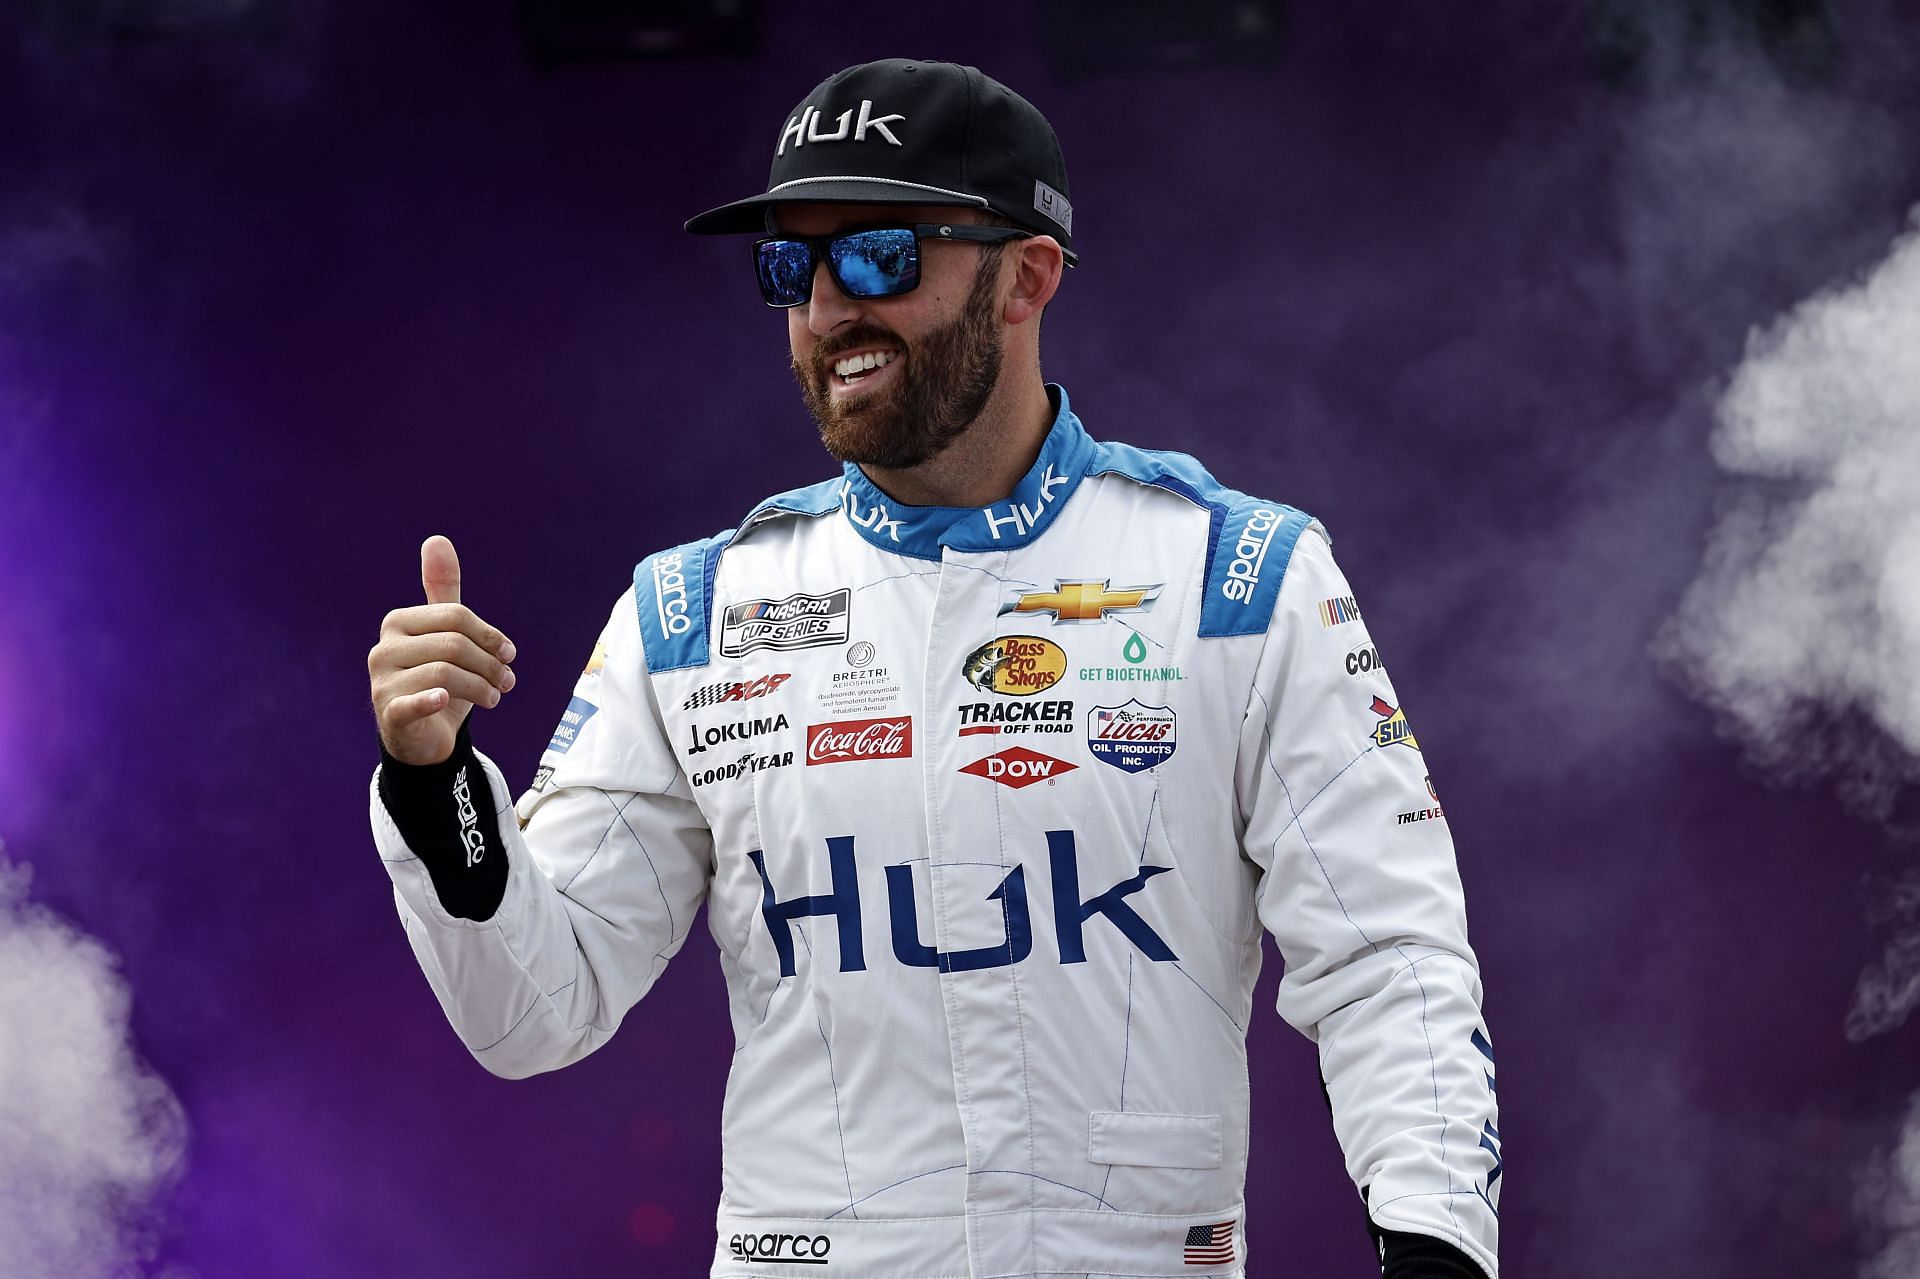 Austin Dillon walks onstage during driver intros before the 2022 NASCAR Cup Series Federated Auto Parts 400 at Richmond Raceway in Richmond, Virginia. (Photo by Chris Graythen/Getty Images)